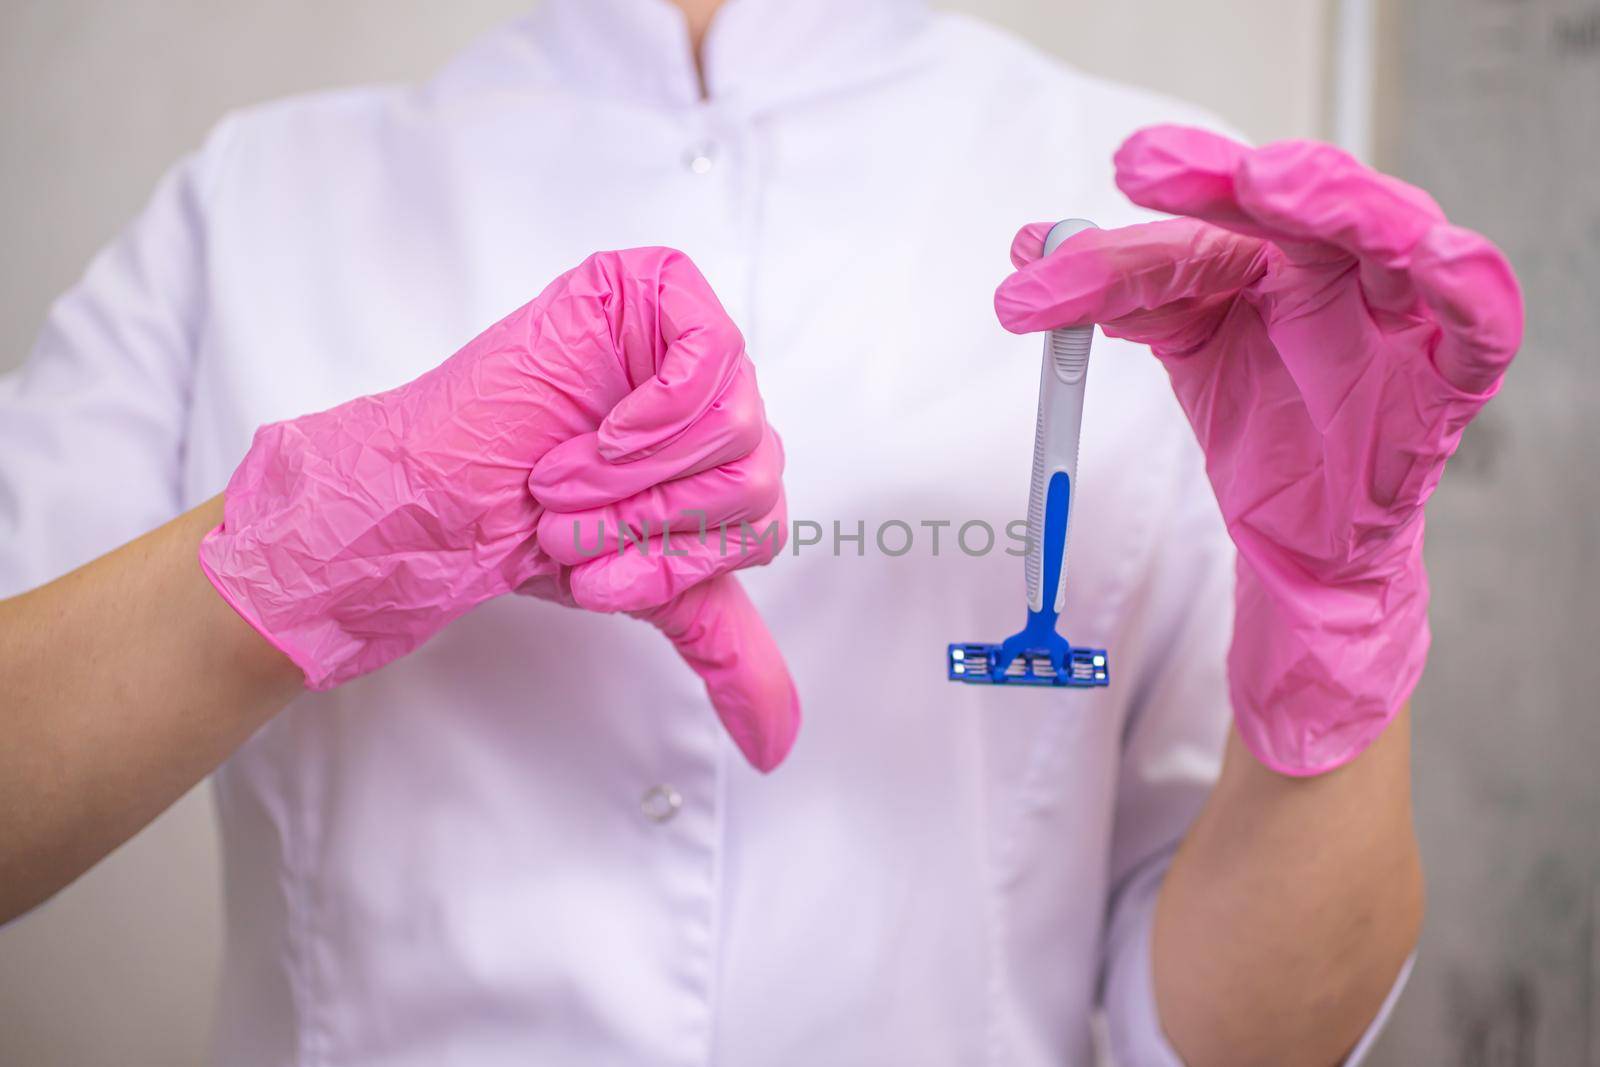 A close-up of a woman in a medical gown is hands in pink gloves holding a razor. Thumb down indignantly shows the depilation master